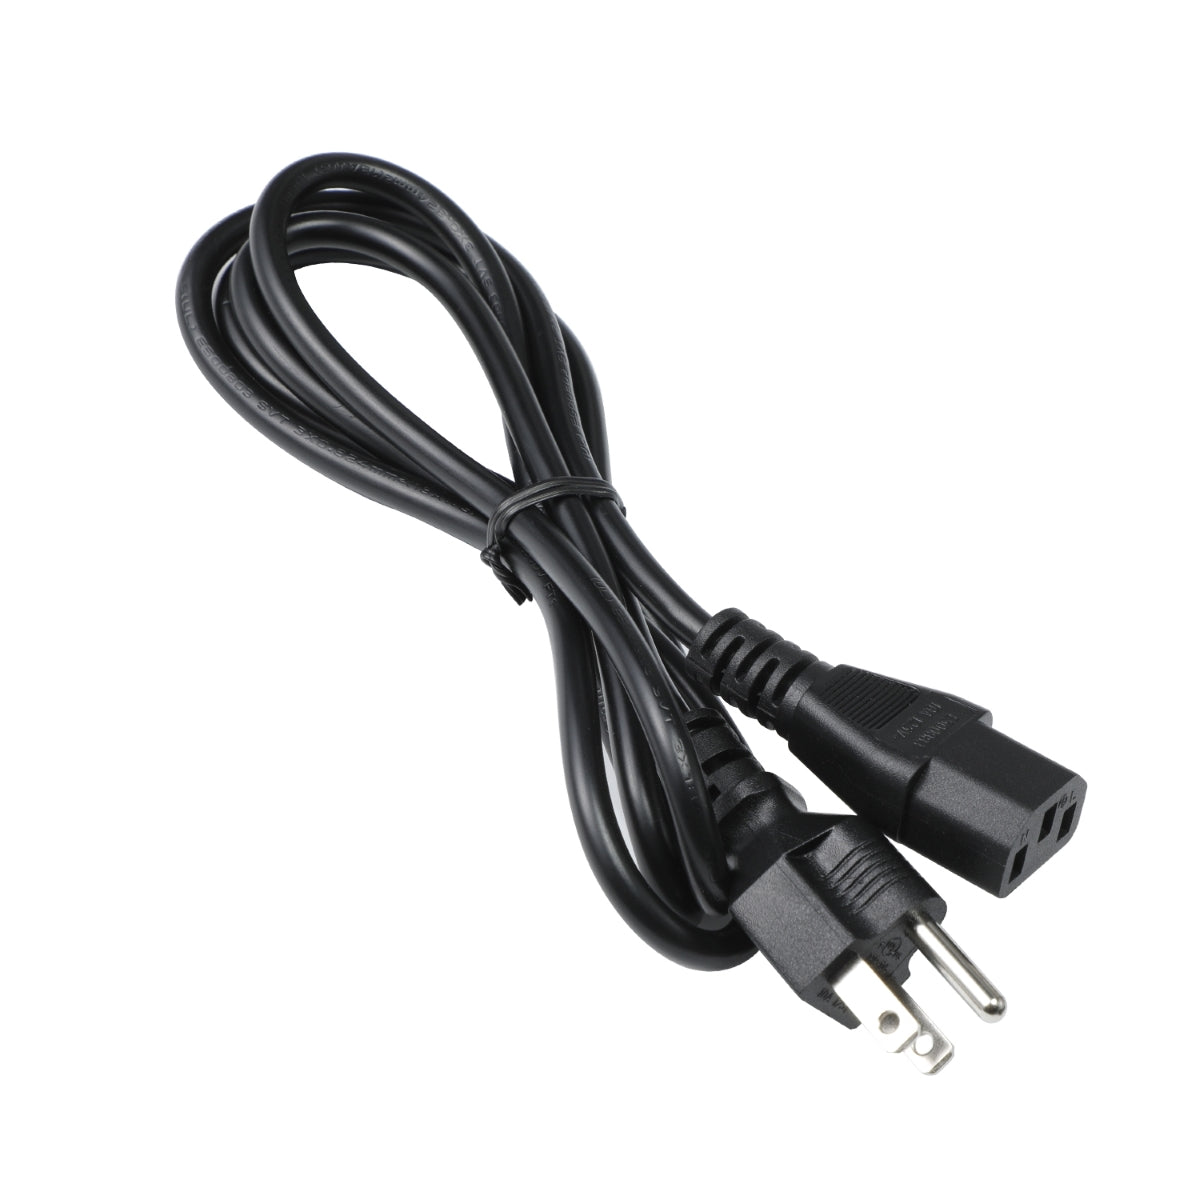 Power Cord for Dell S3219D Monitor.